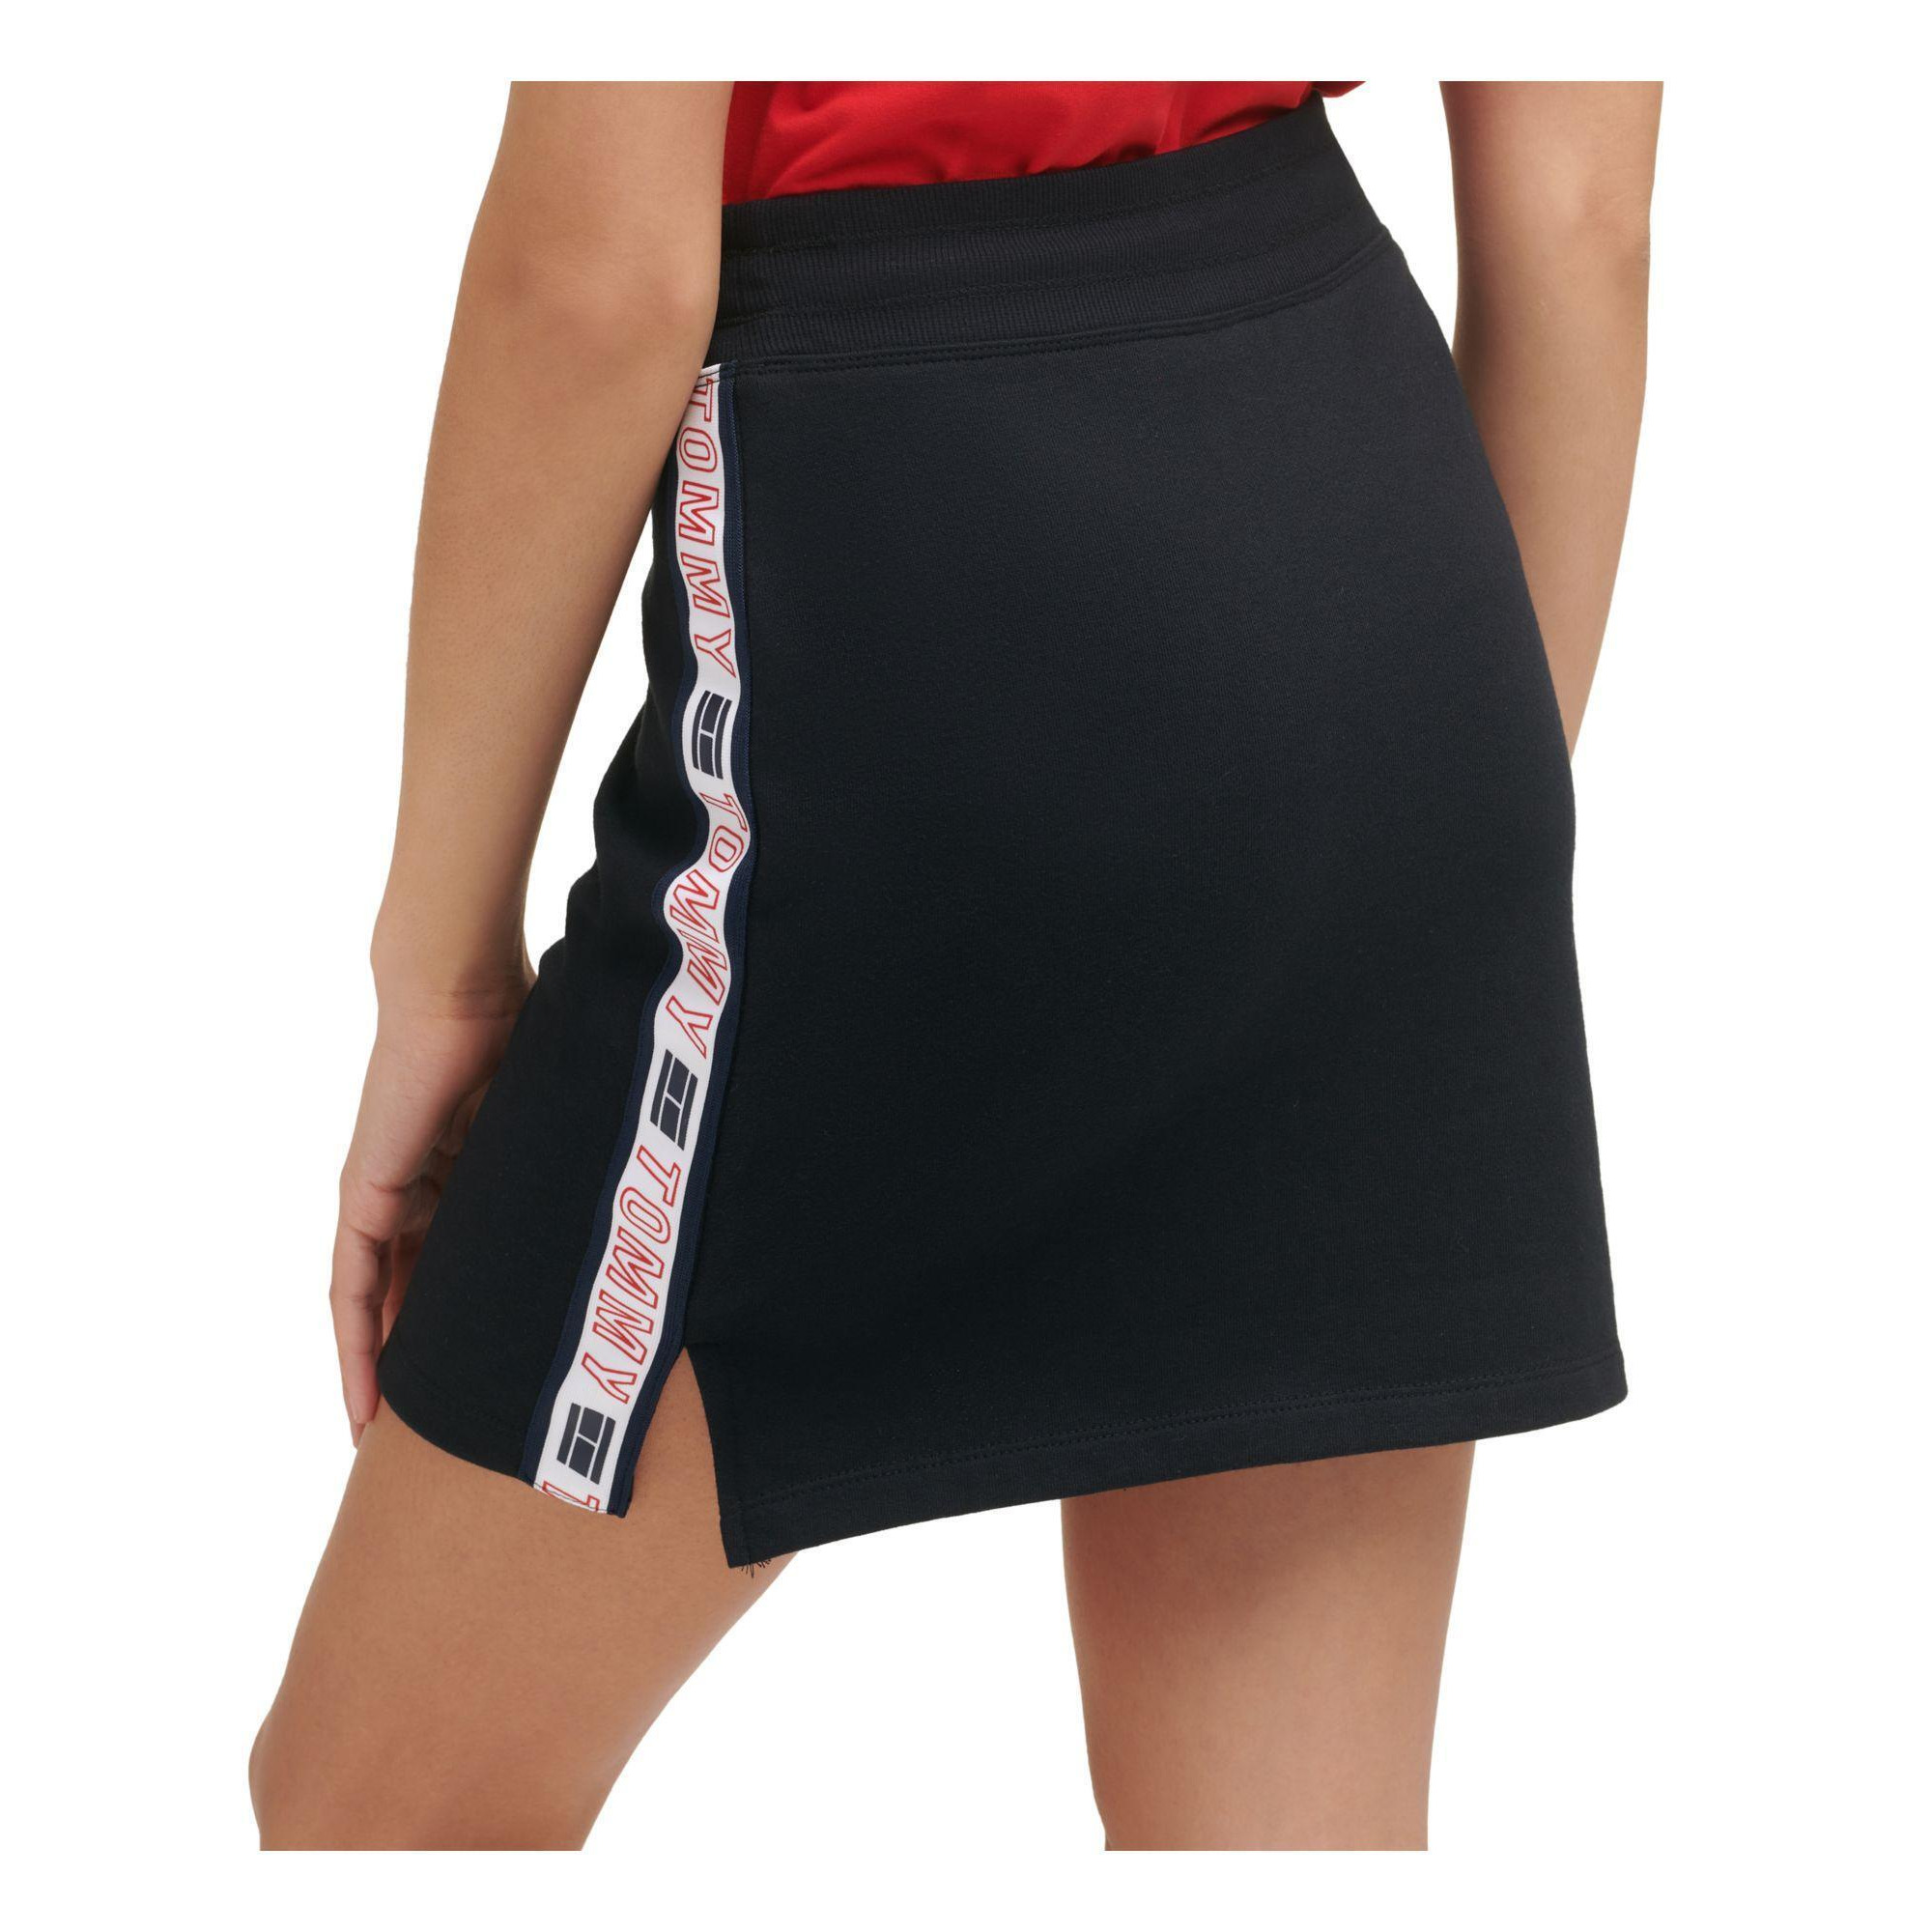 Tommy Hilfiger Women's Ribbed Short Active Wear Skirt Black Size Small